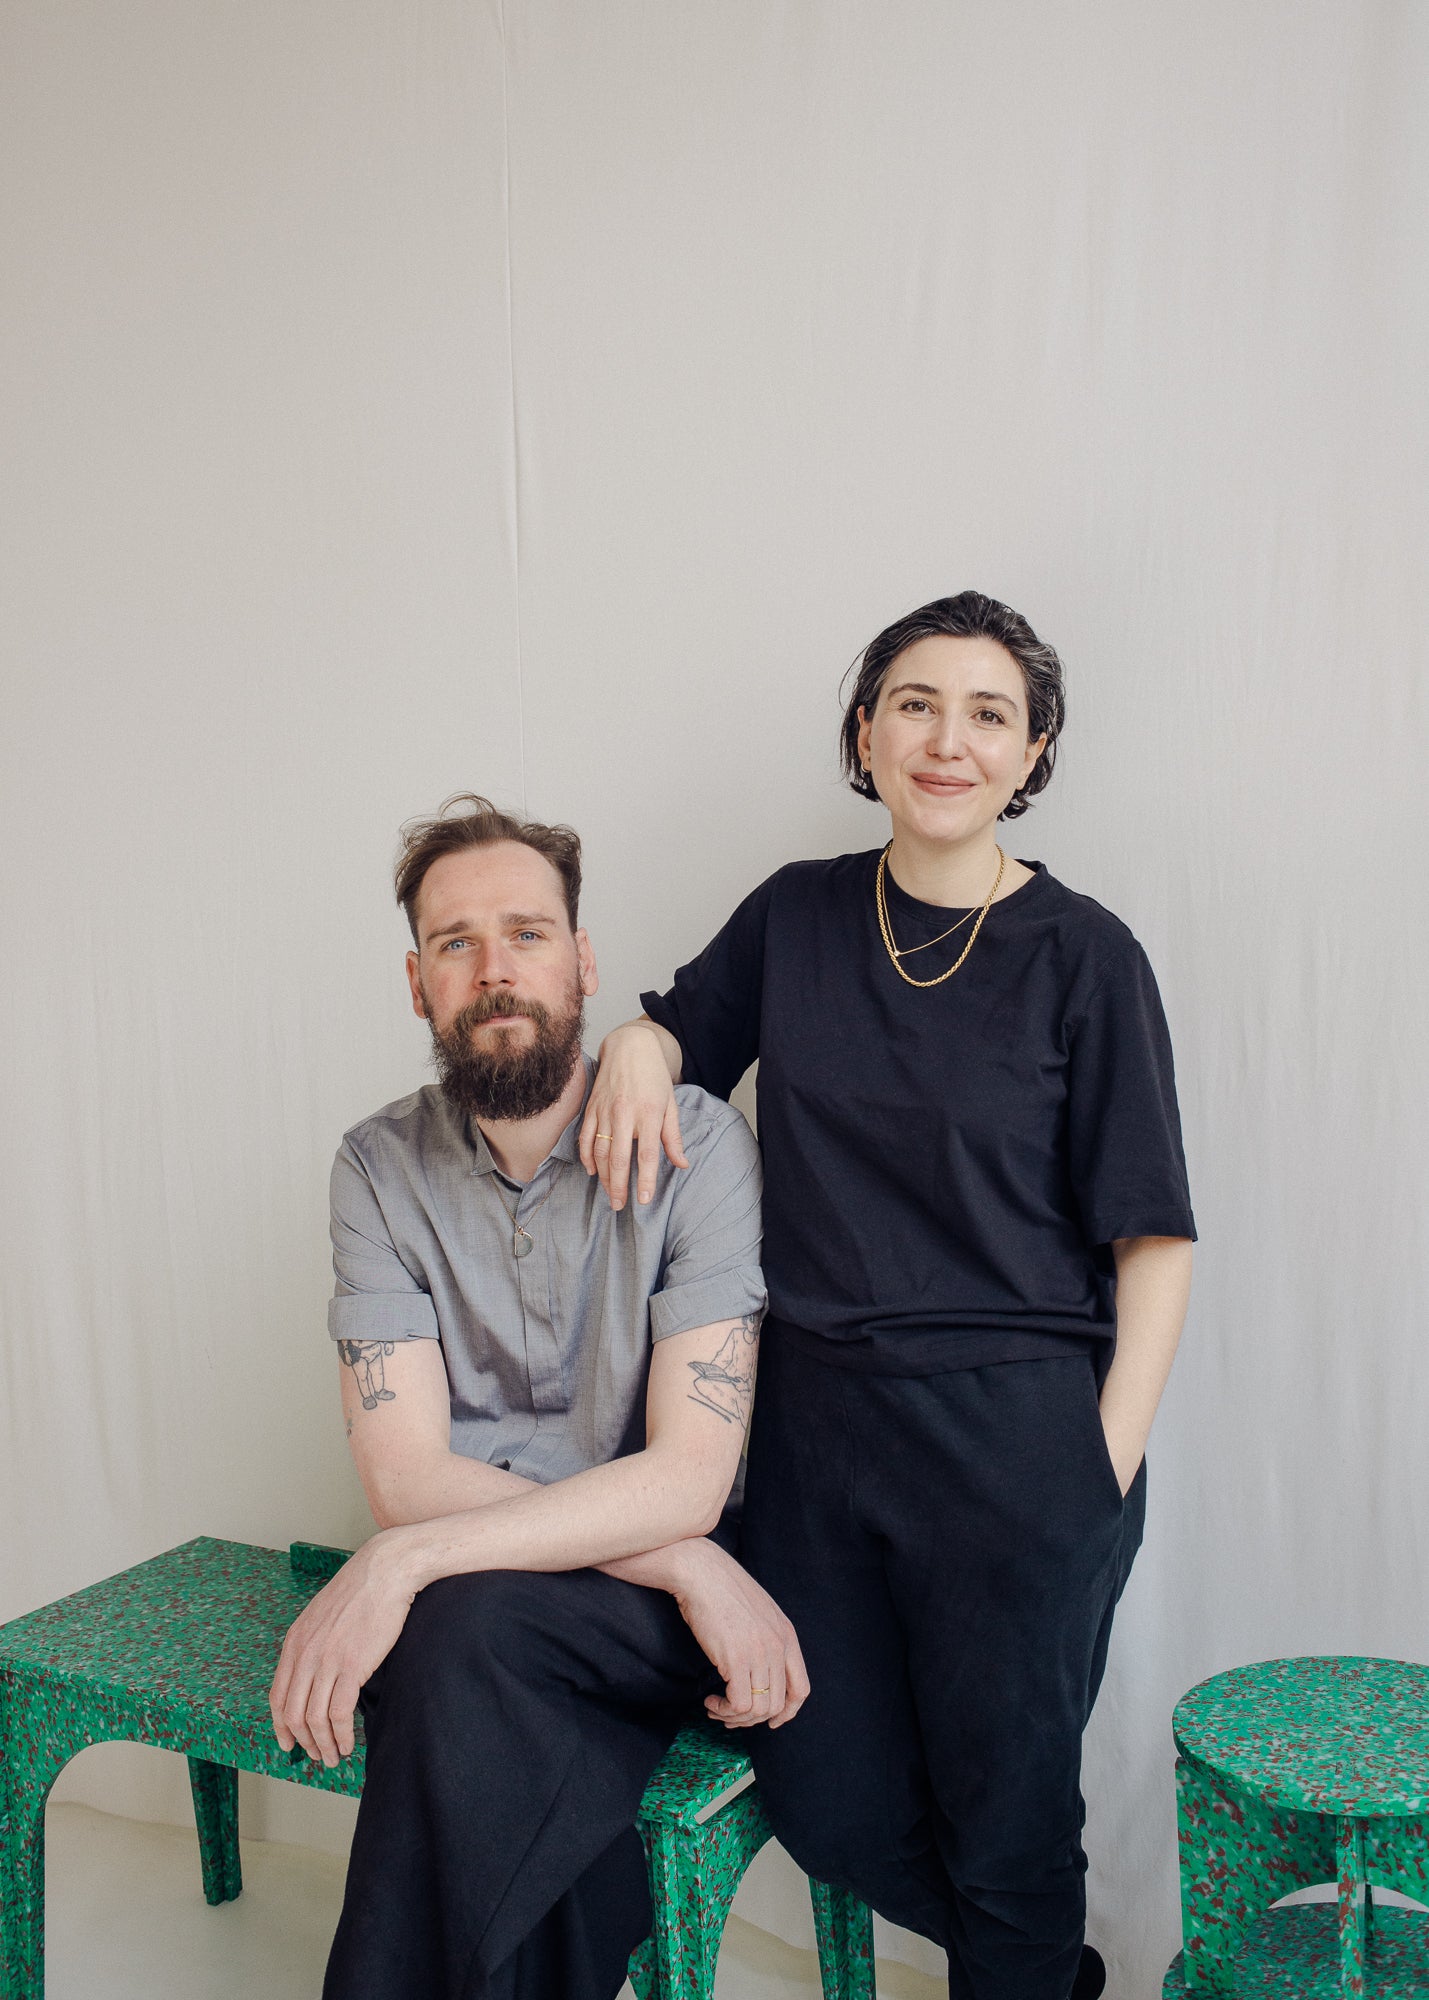 JULIETA BENITO SANZ AND DIRK LACHMANN FROM THE MINIMONO PROJECT - BRAND FOR ECO FRIENDLY - PLAYFUL - MULTI FUNCTIONAL - SUSTAINABLE - HIGH QUALITY - DESIGN FURNITURE FROM RECYCLED PLASTIC FOR BOTH ADULT AND CHILDREN MADE IN BERLIN GERMANY